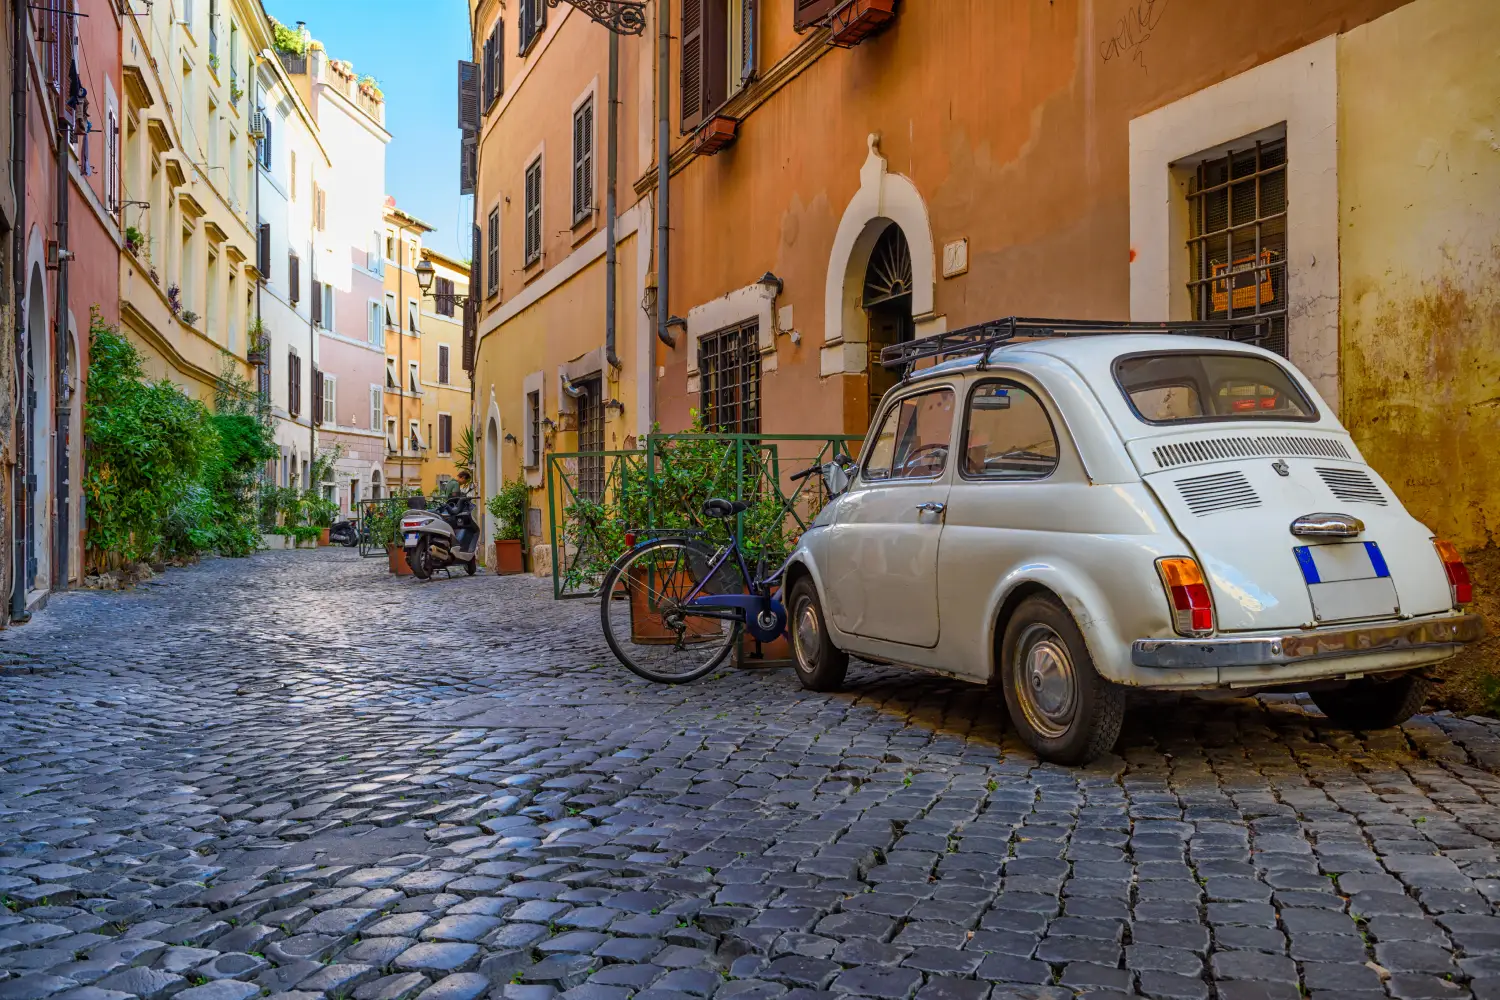 Ferry to Italy - Cozy old street in Trastevere in Rome, Italy Trastevere is rione of Rome, on the west bank of the Tiber in Rome, Lazio, Italy Architecture and landmark of Rome.